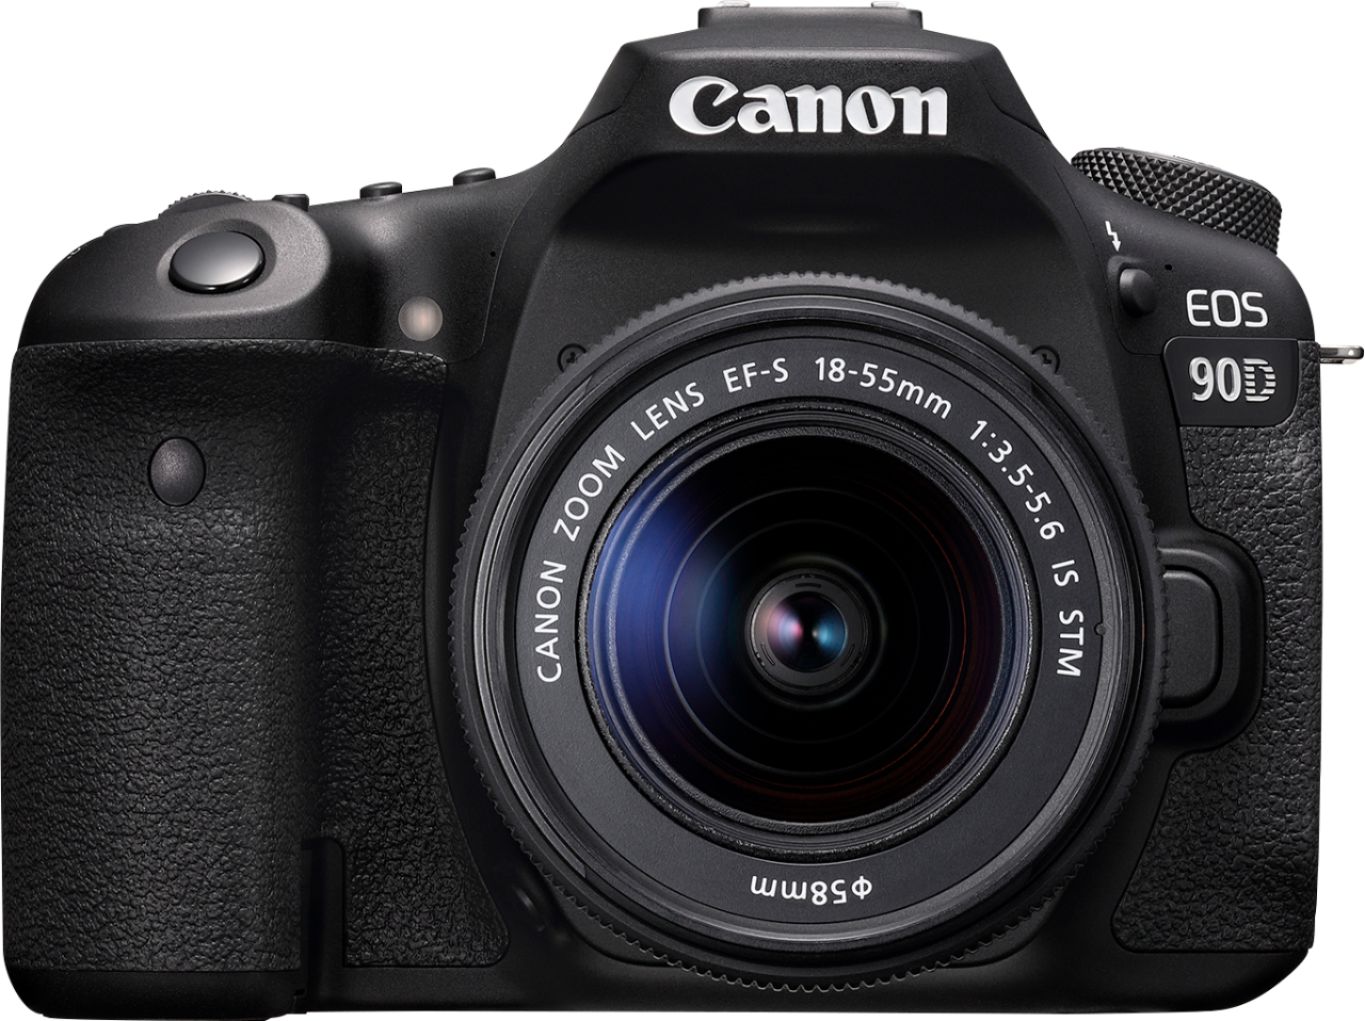 spare Compliment Passerby Canon EOS 90D DSLR Camera with EF-S 18-55mm Lens Black 3616C009 - Best Buy